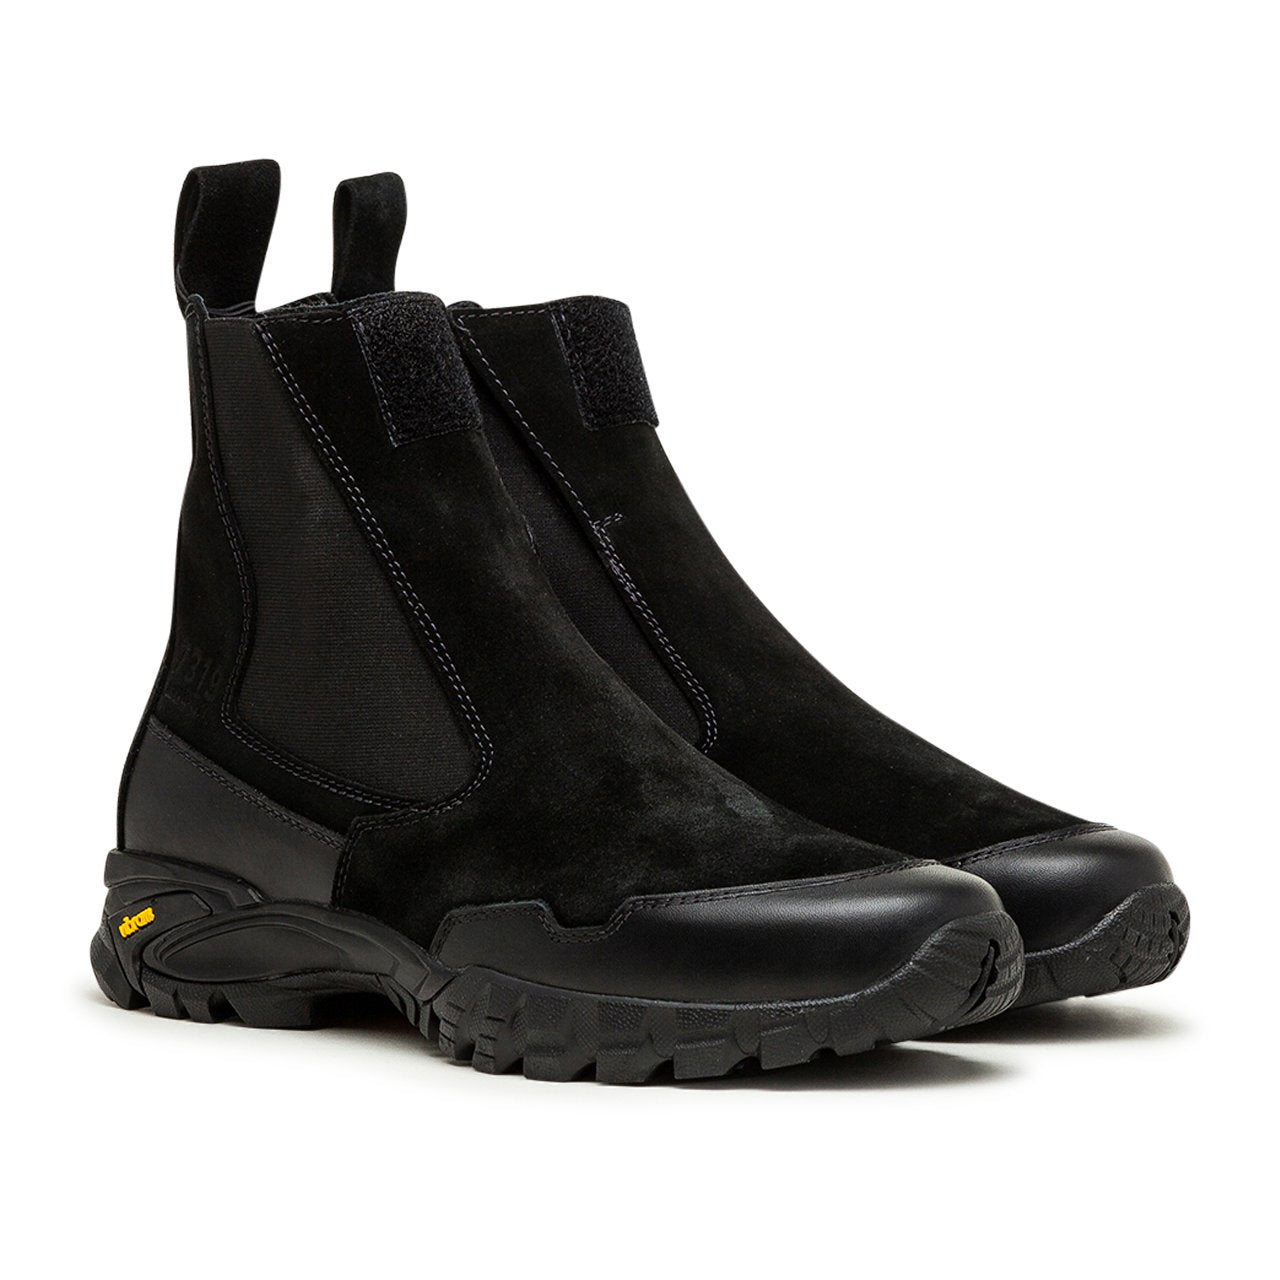 stone island shadow project velcro fastened chelsea boot (black) - 7319s0422 - a.plus - Image - 2